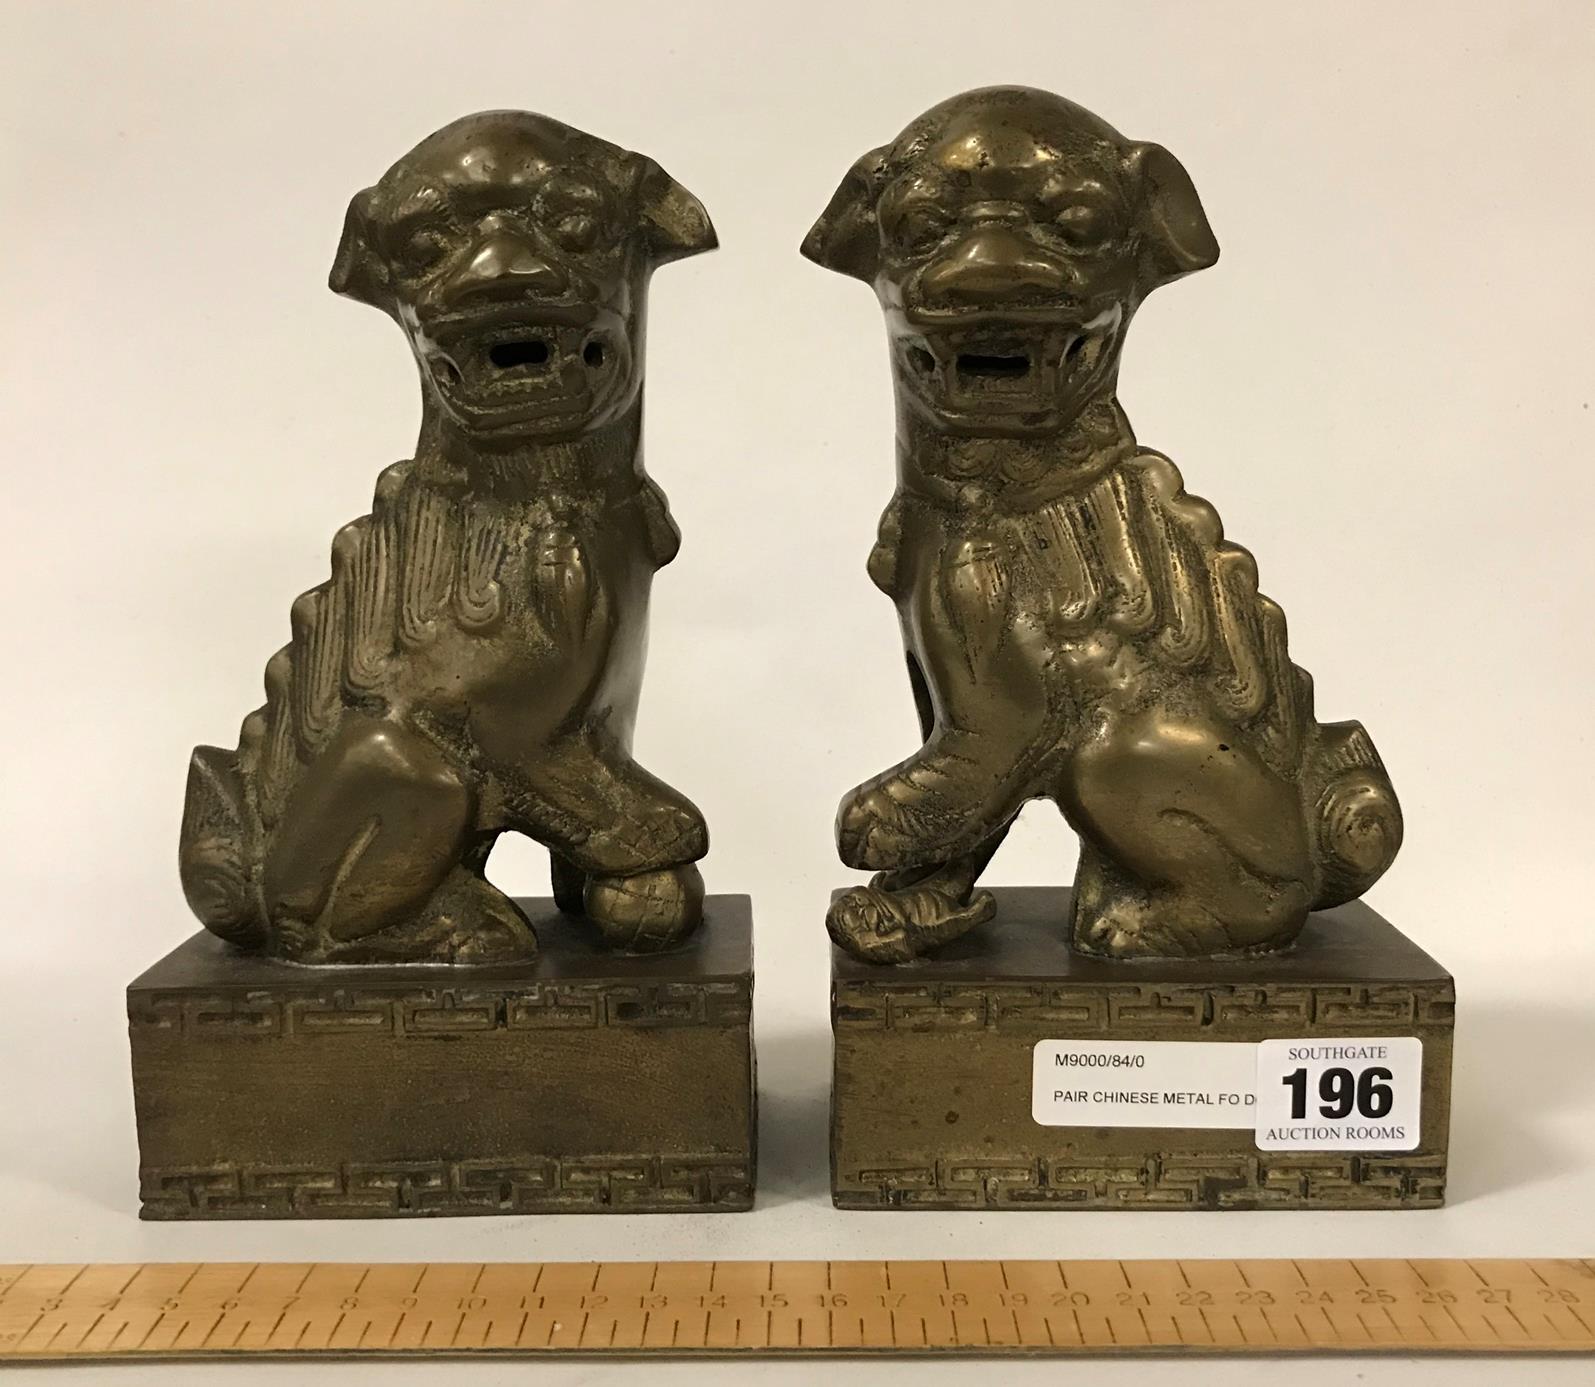 PAIR CHINESE METAL FO DOGS